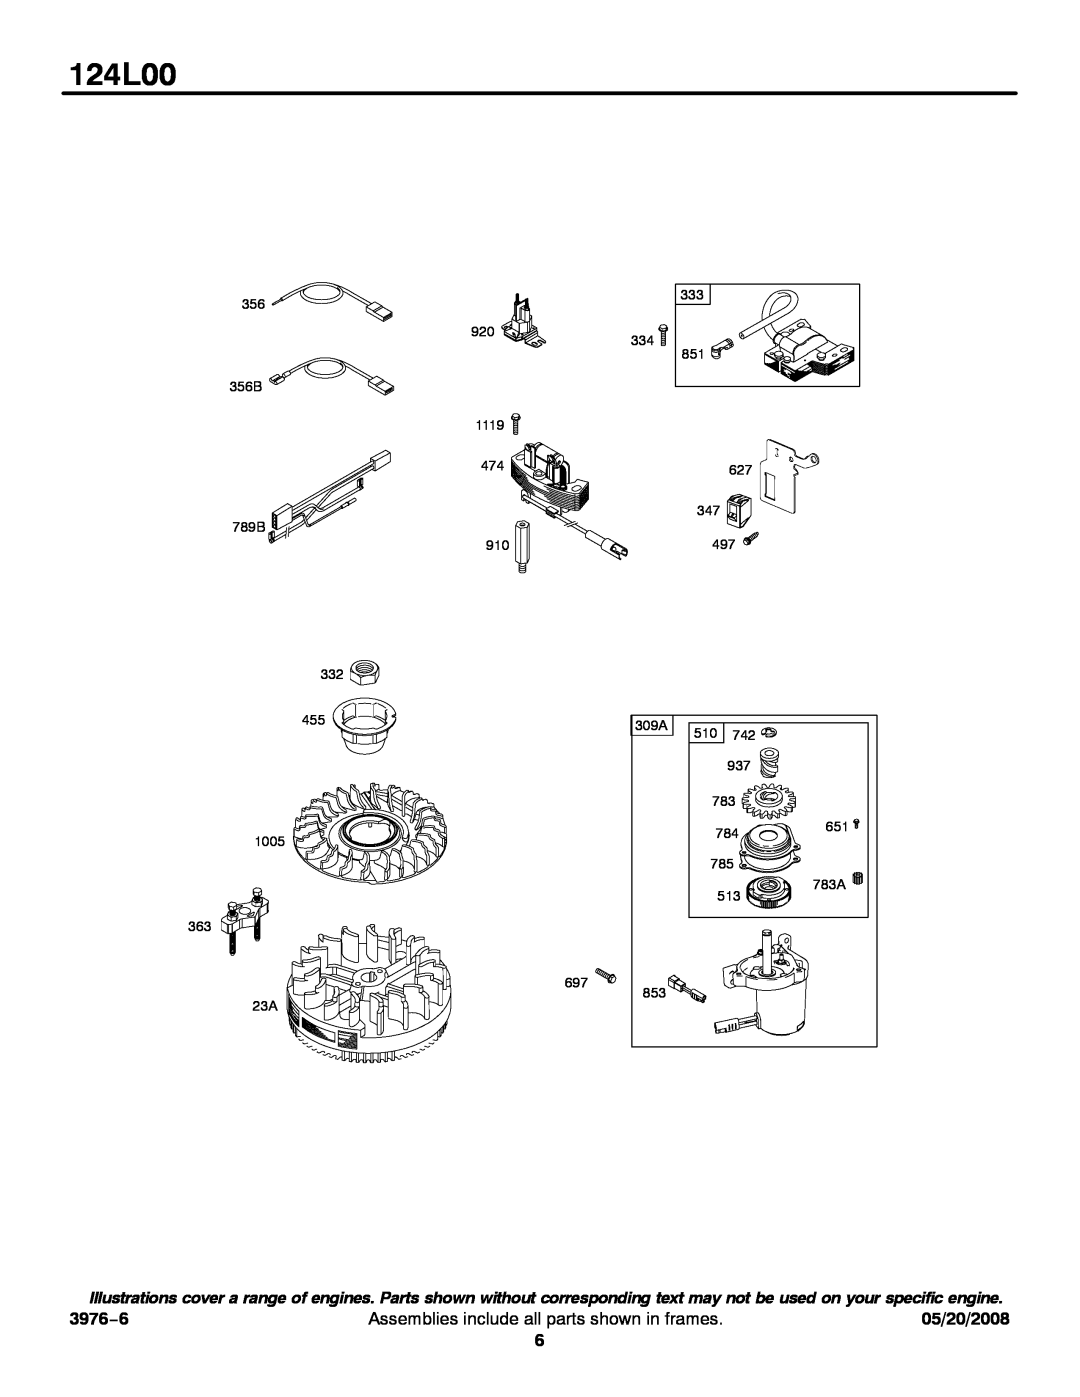 Briggs & Stratton 124L00 service manual 3976−6, Assemblies include all parts shown in frames, 05/20/2008 